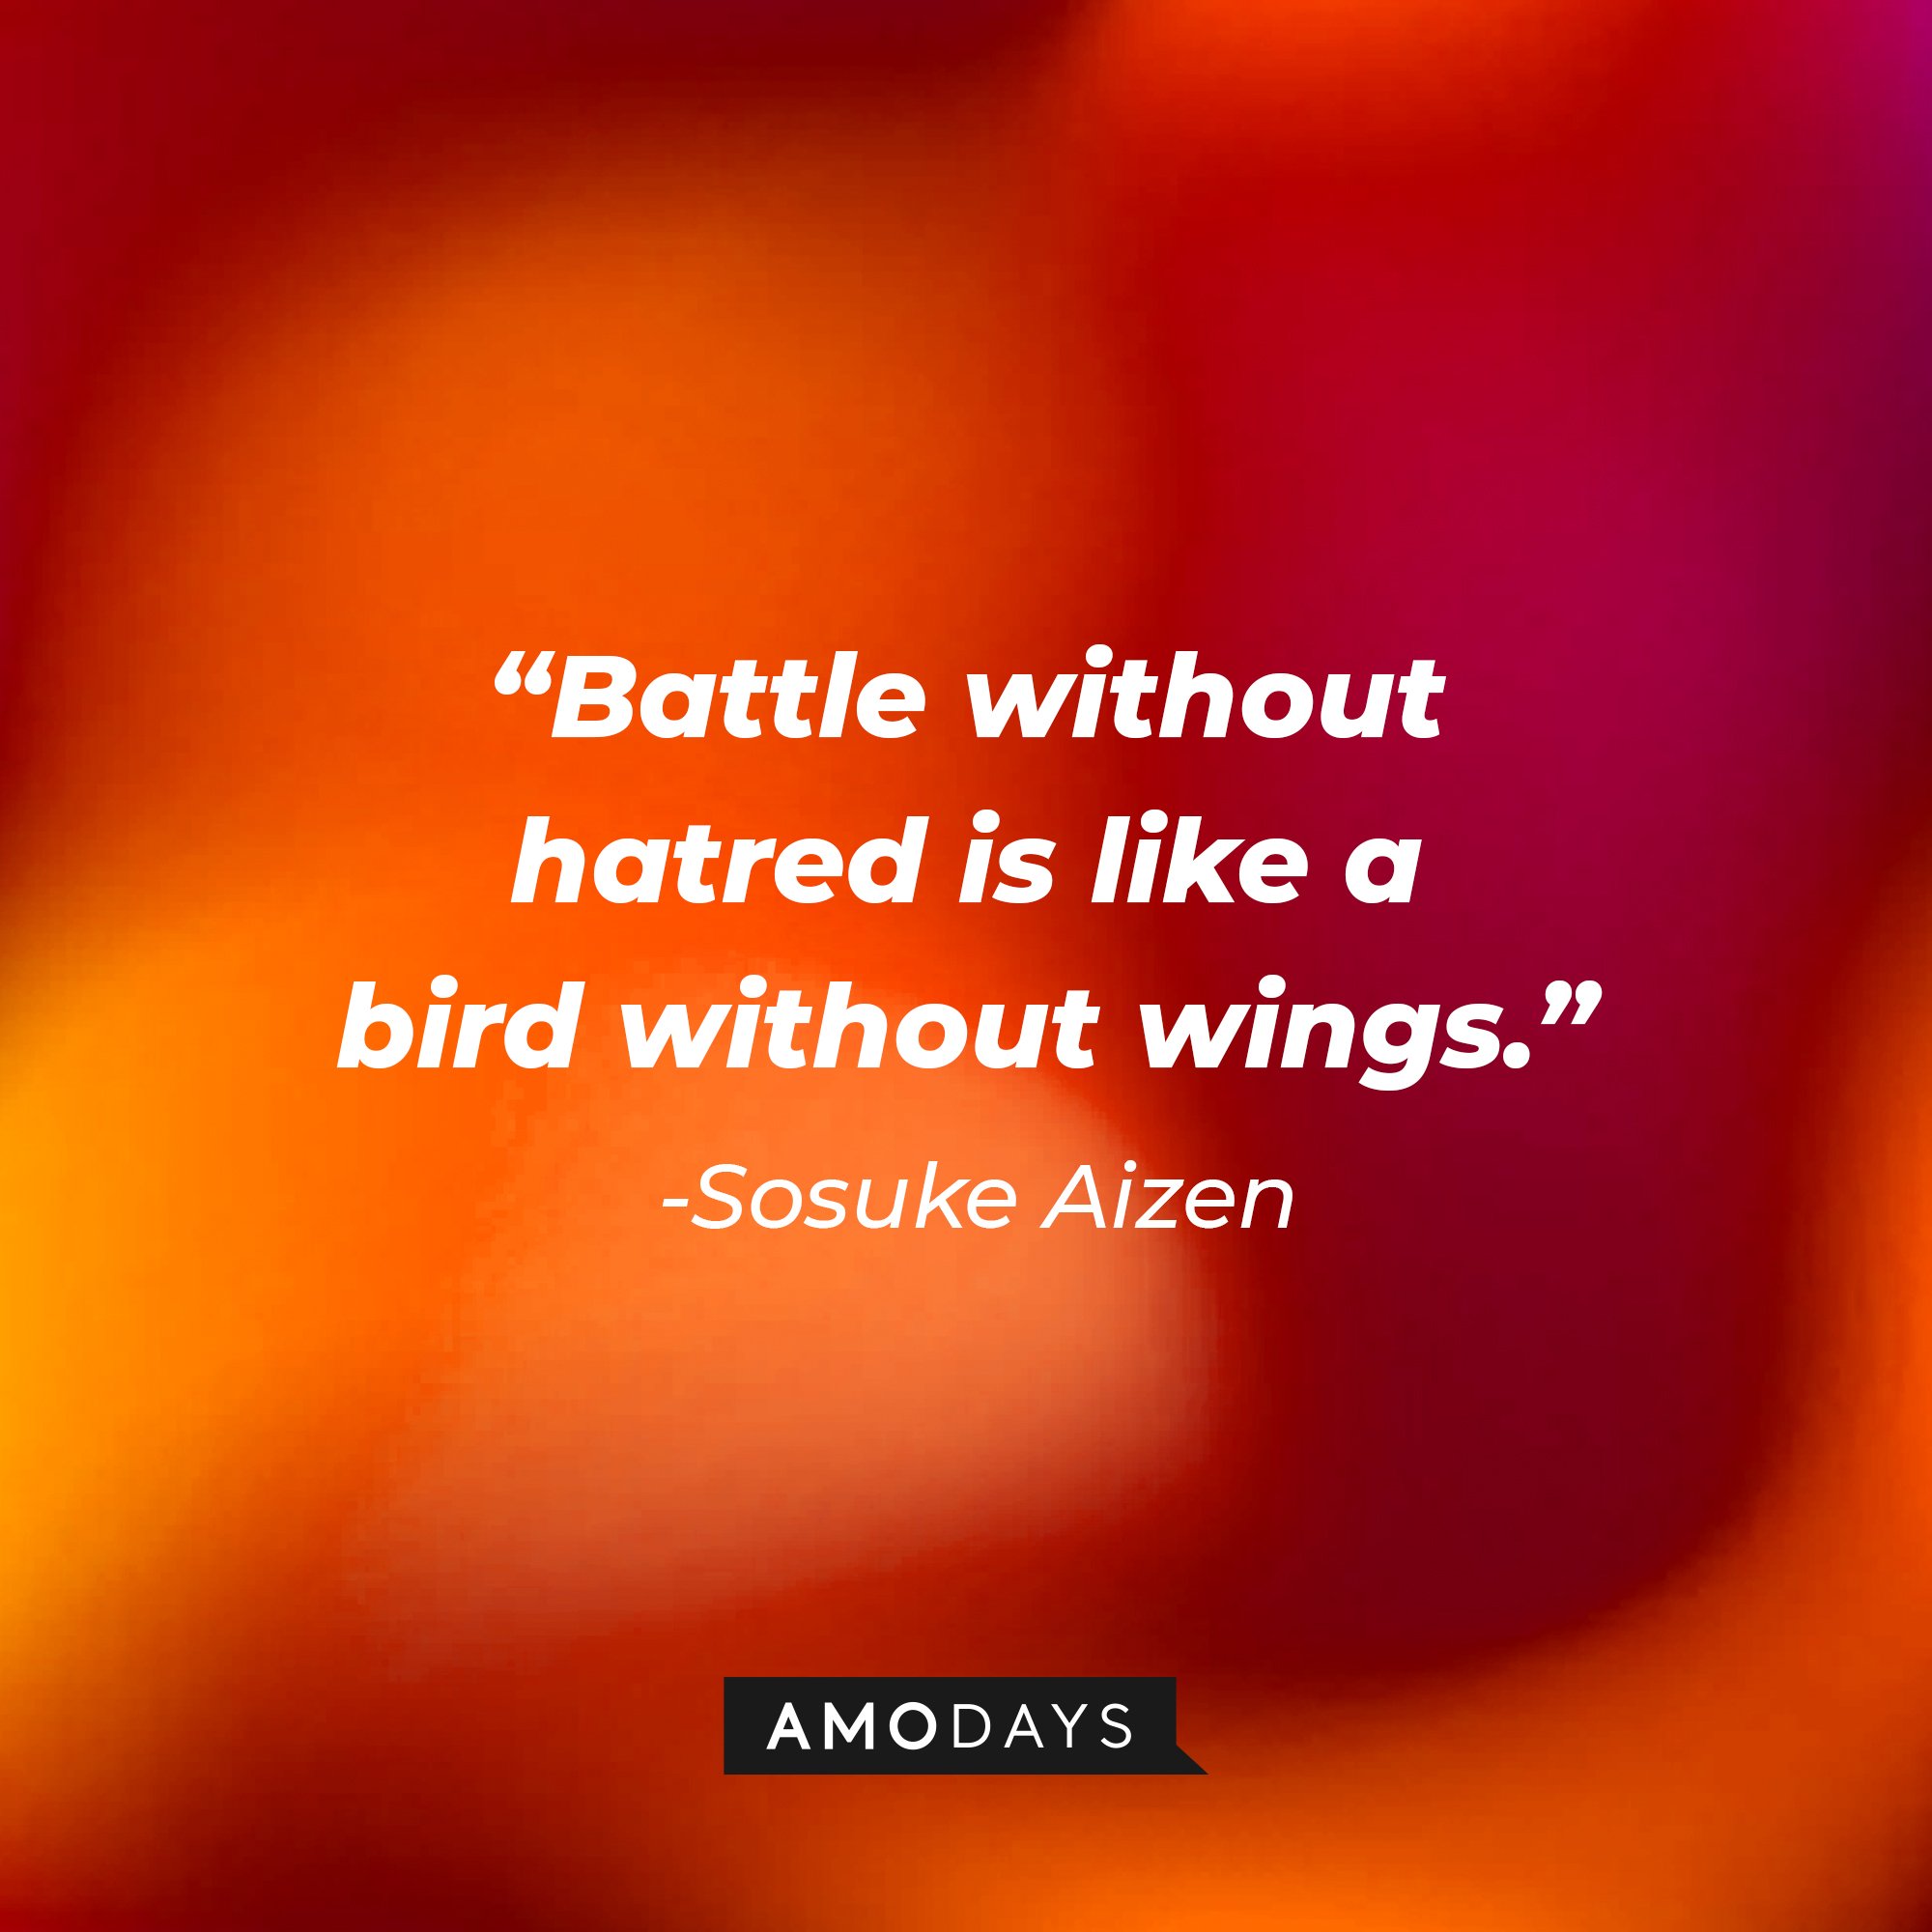 Sosuke Aizen's quote: "Battle without hatred is like a bird without wings."  | Image: AmoDays